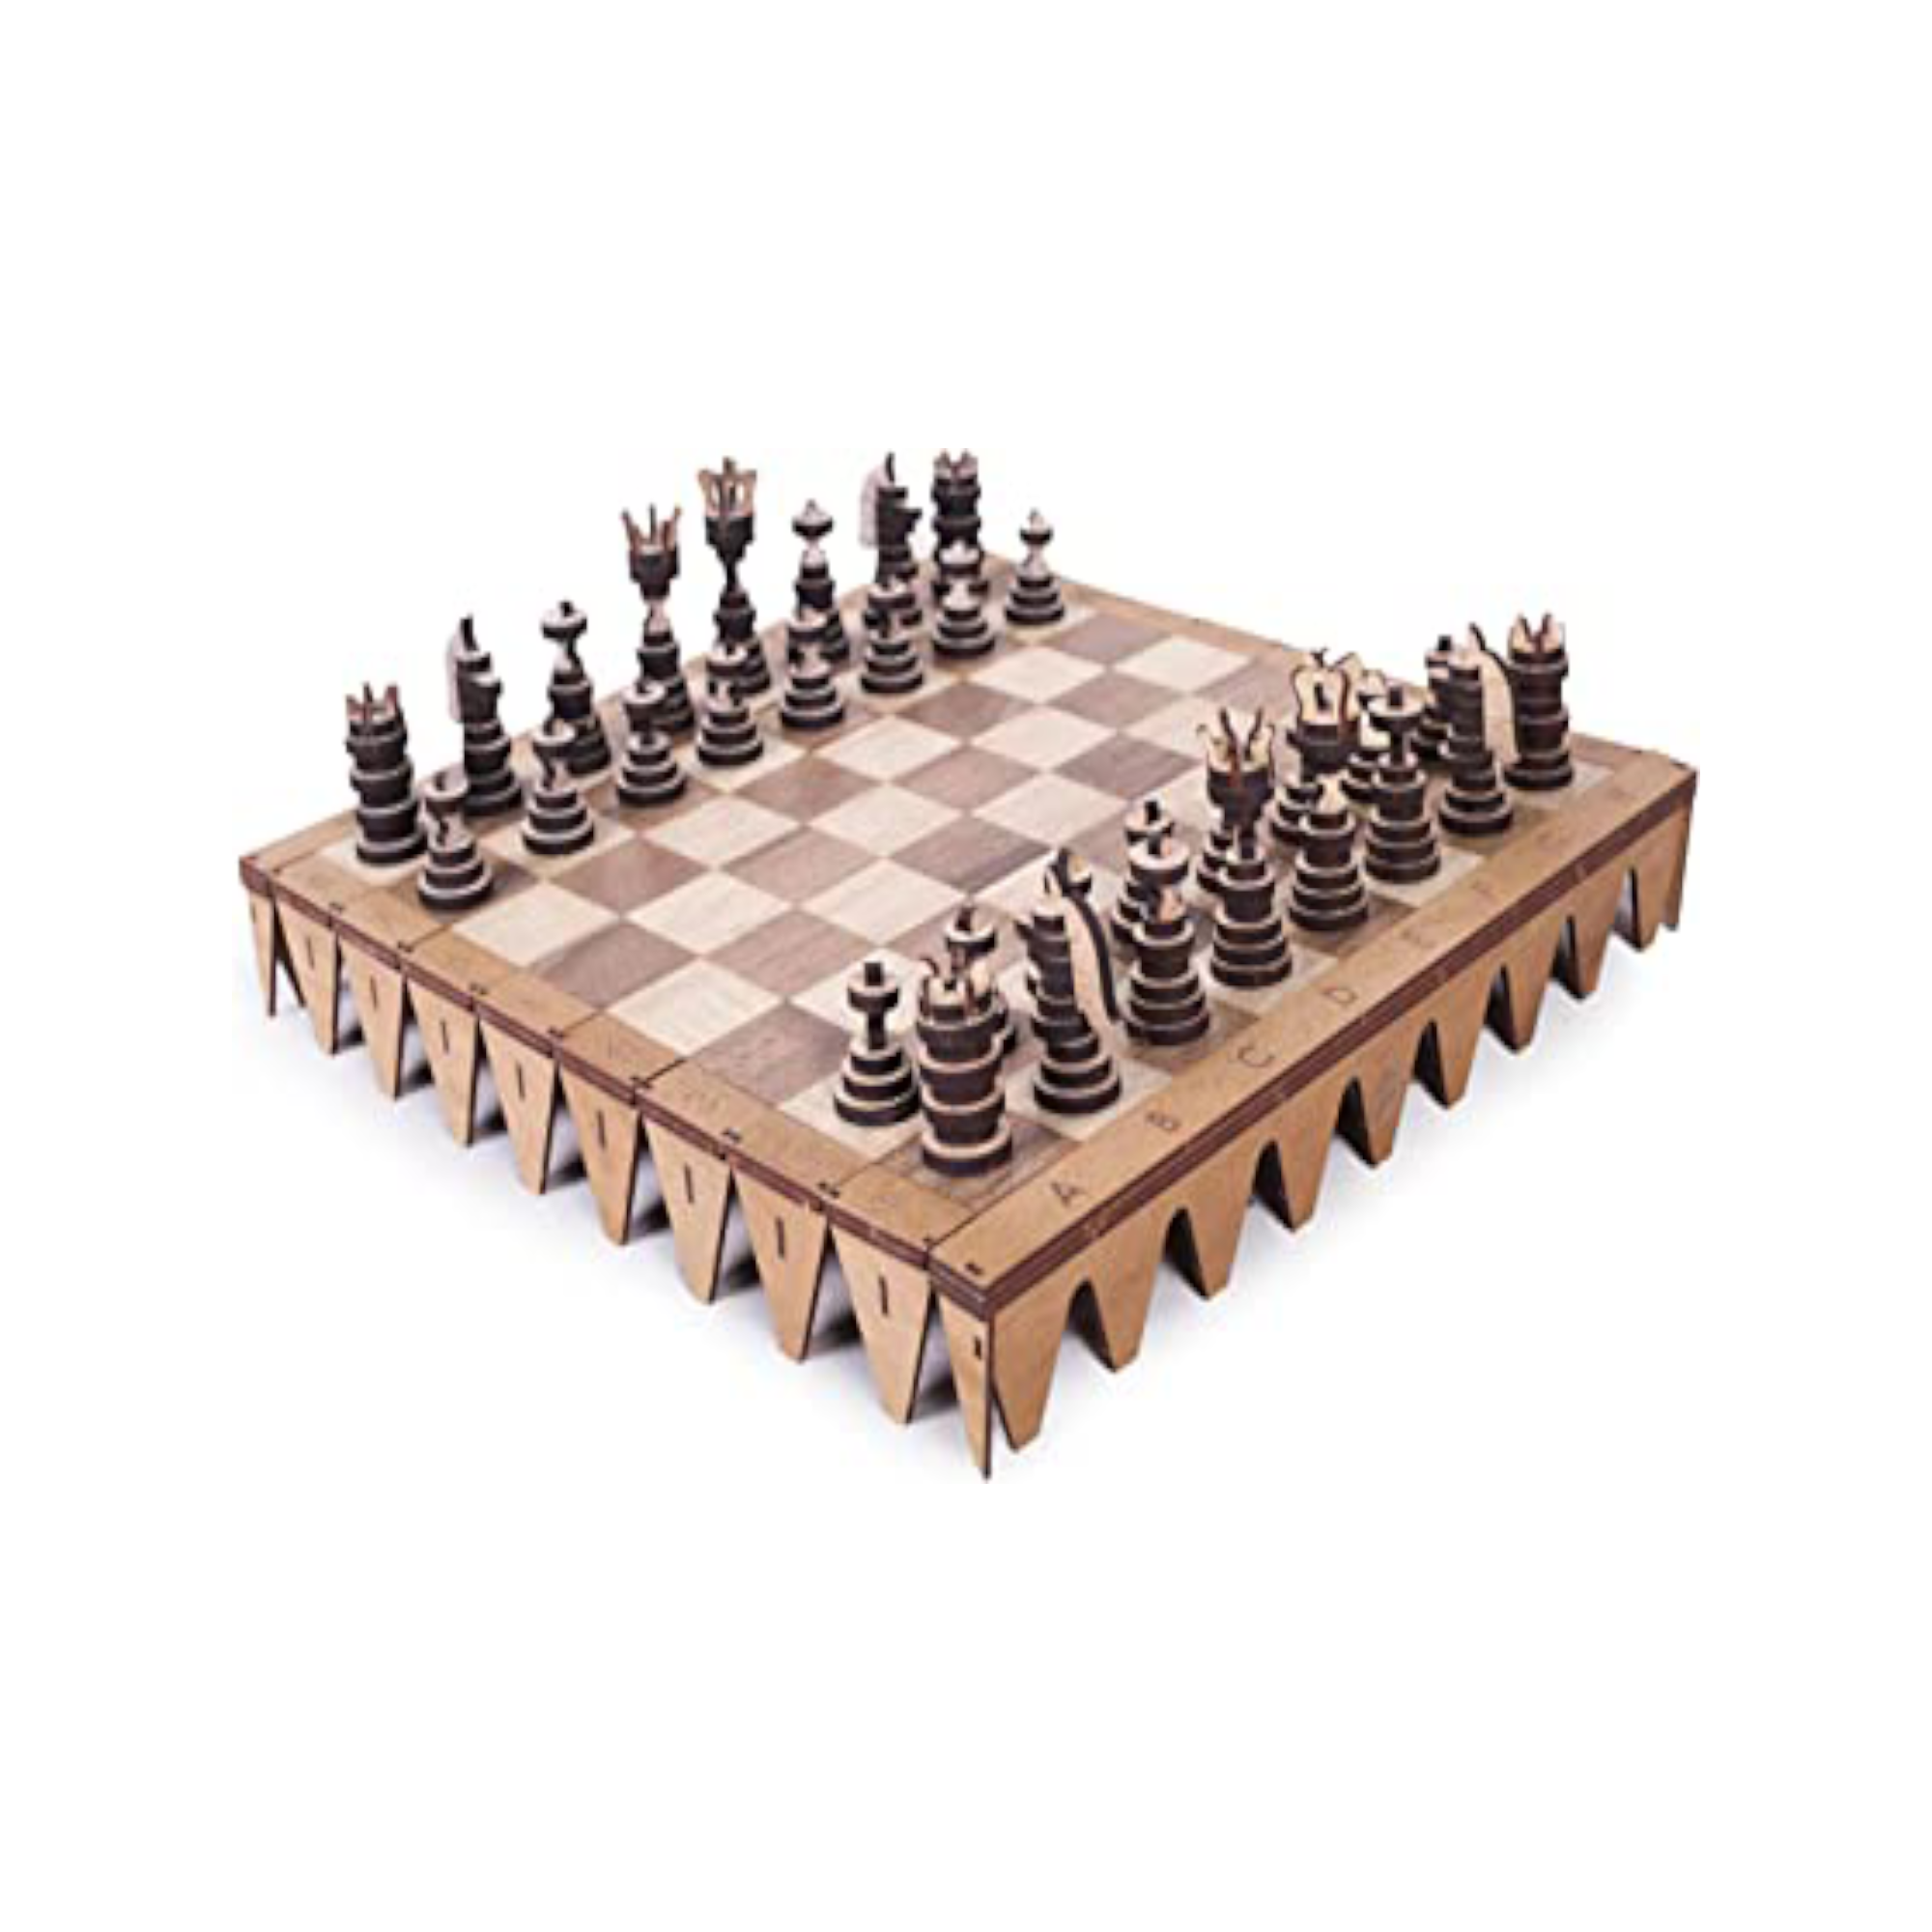 Wooden Chess Games Artistic and practical